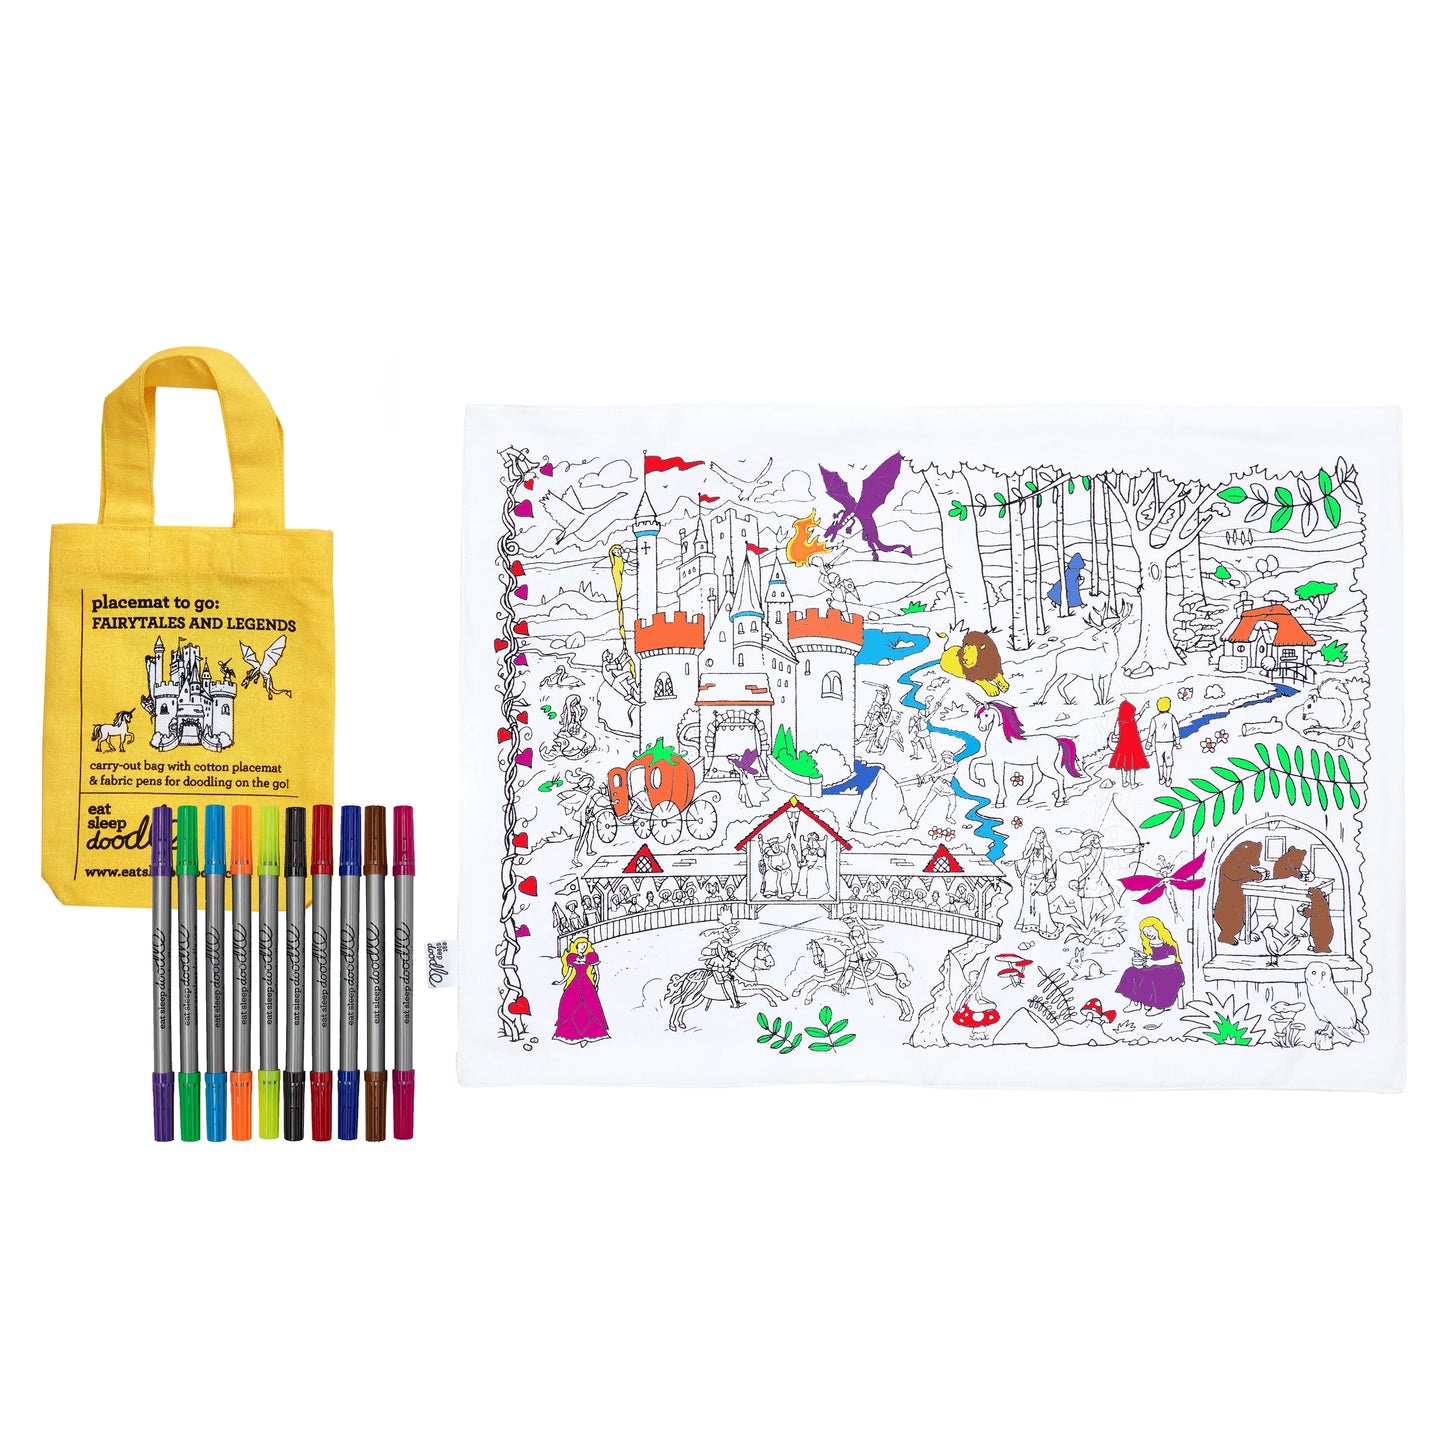 Fairytales & legends placemat to go - colour in & learn